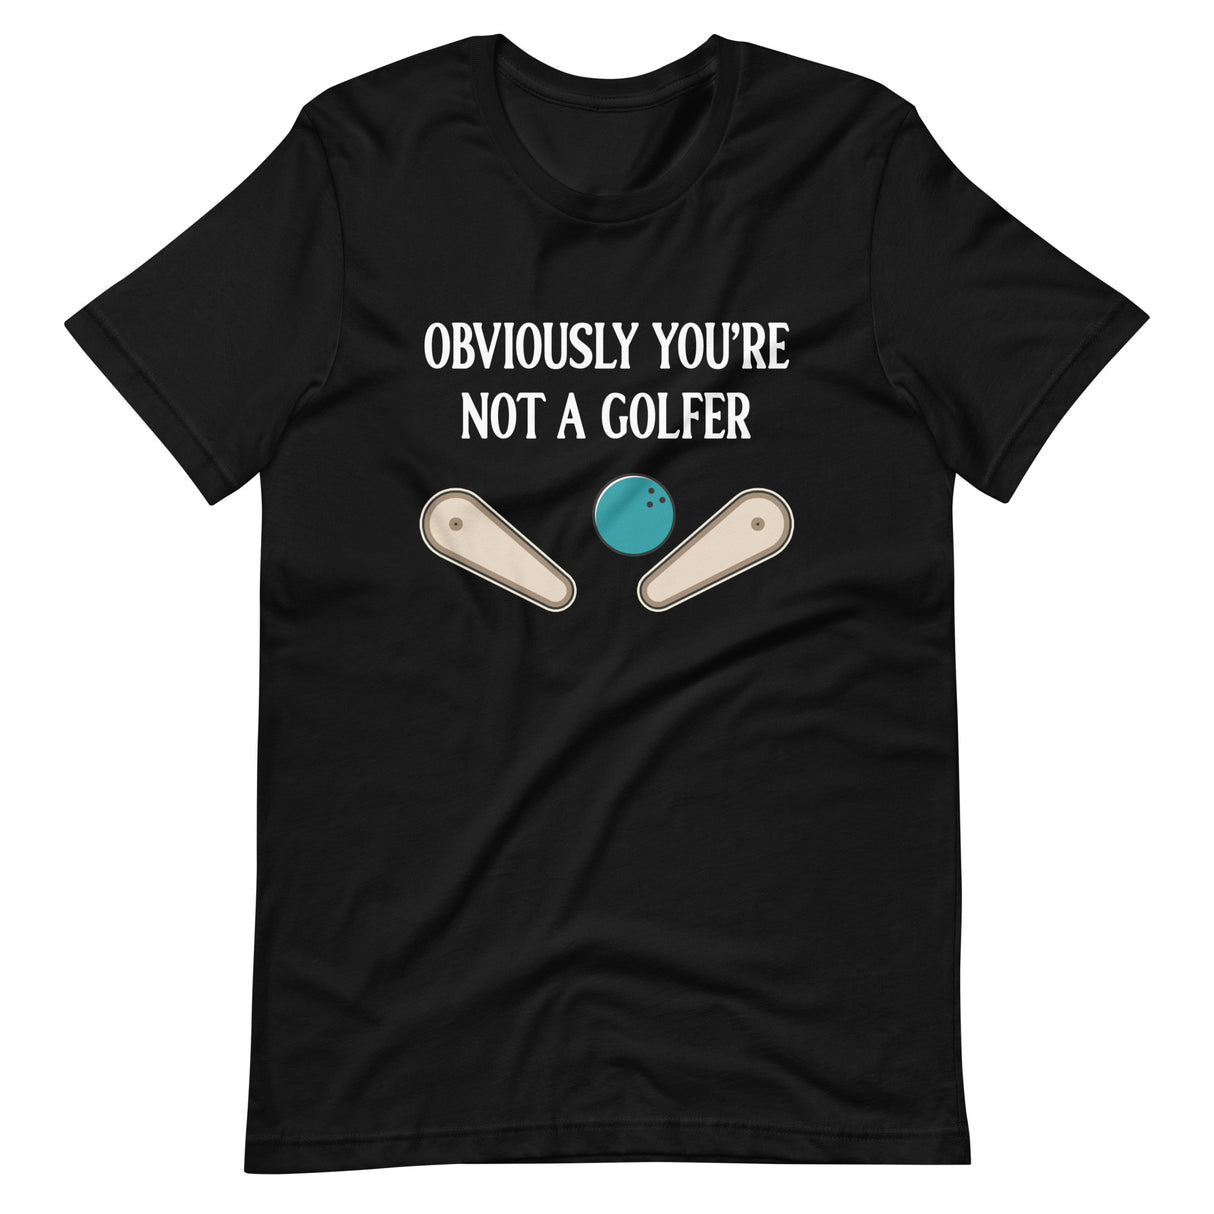 Obviously You're Not a Golfer Shirt